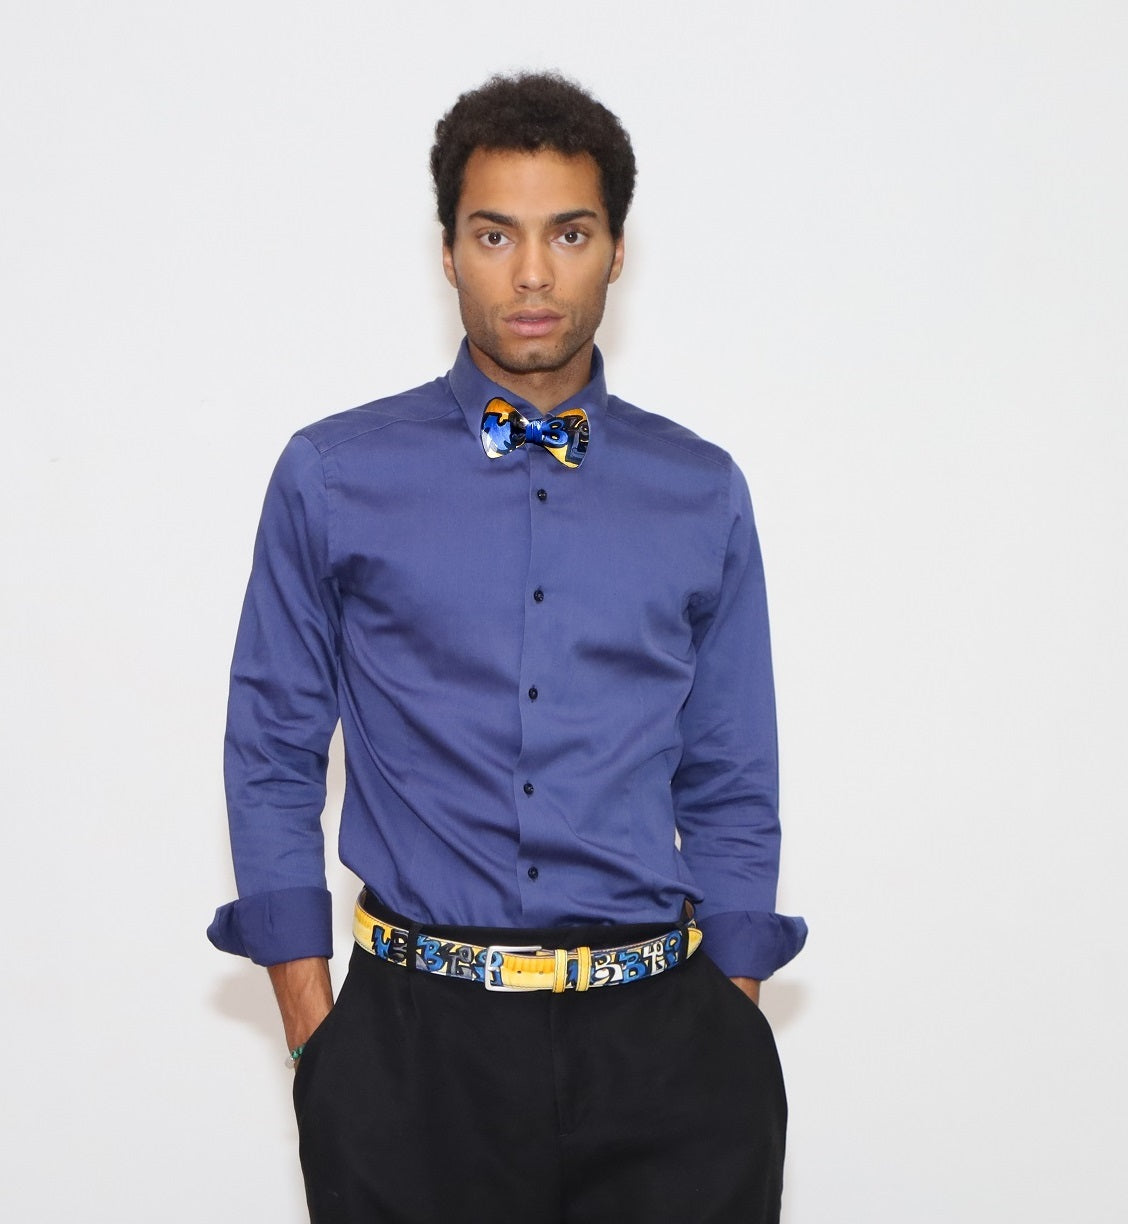 our model wearing black pants and a blue shirt with painted bow tie and belt in a white background